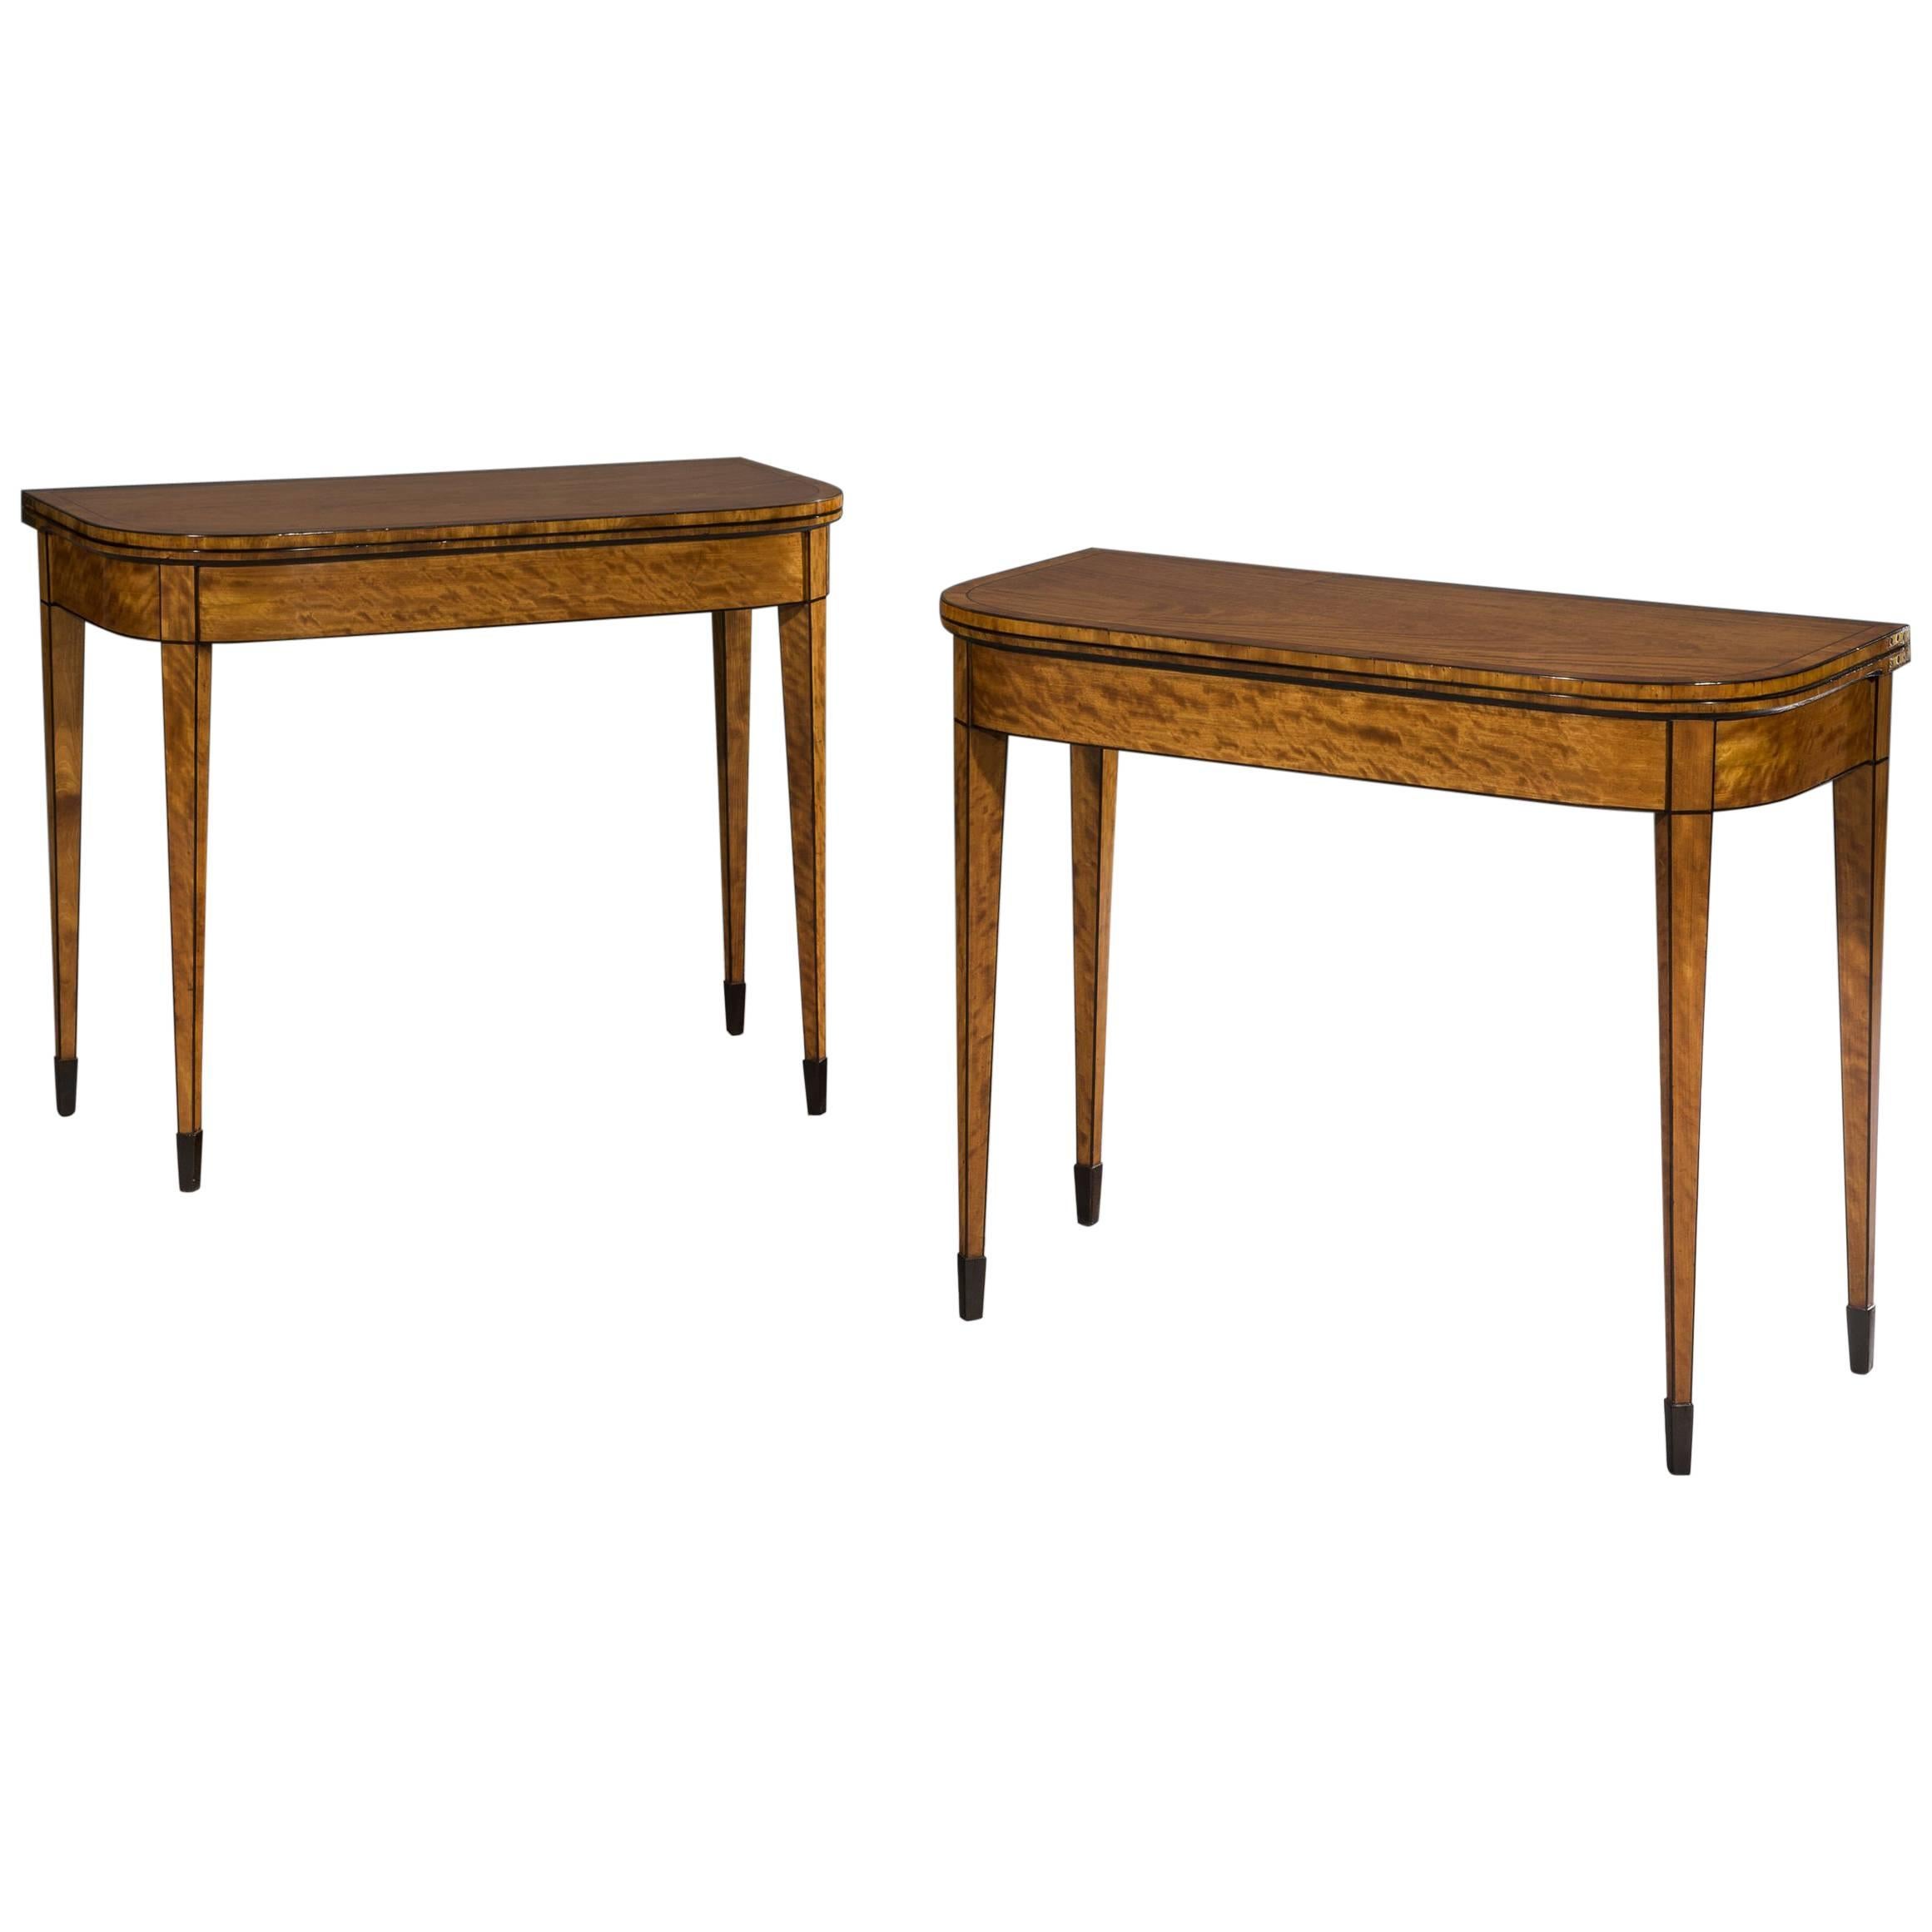 Pair of Early 19th Century Regency Period Satinwood Inlaid Card Tables For Sale